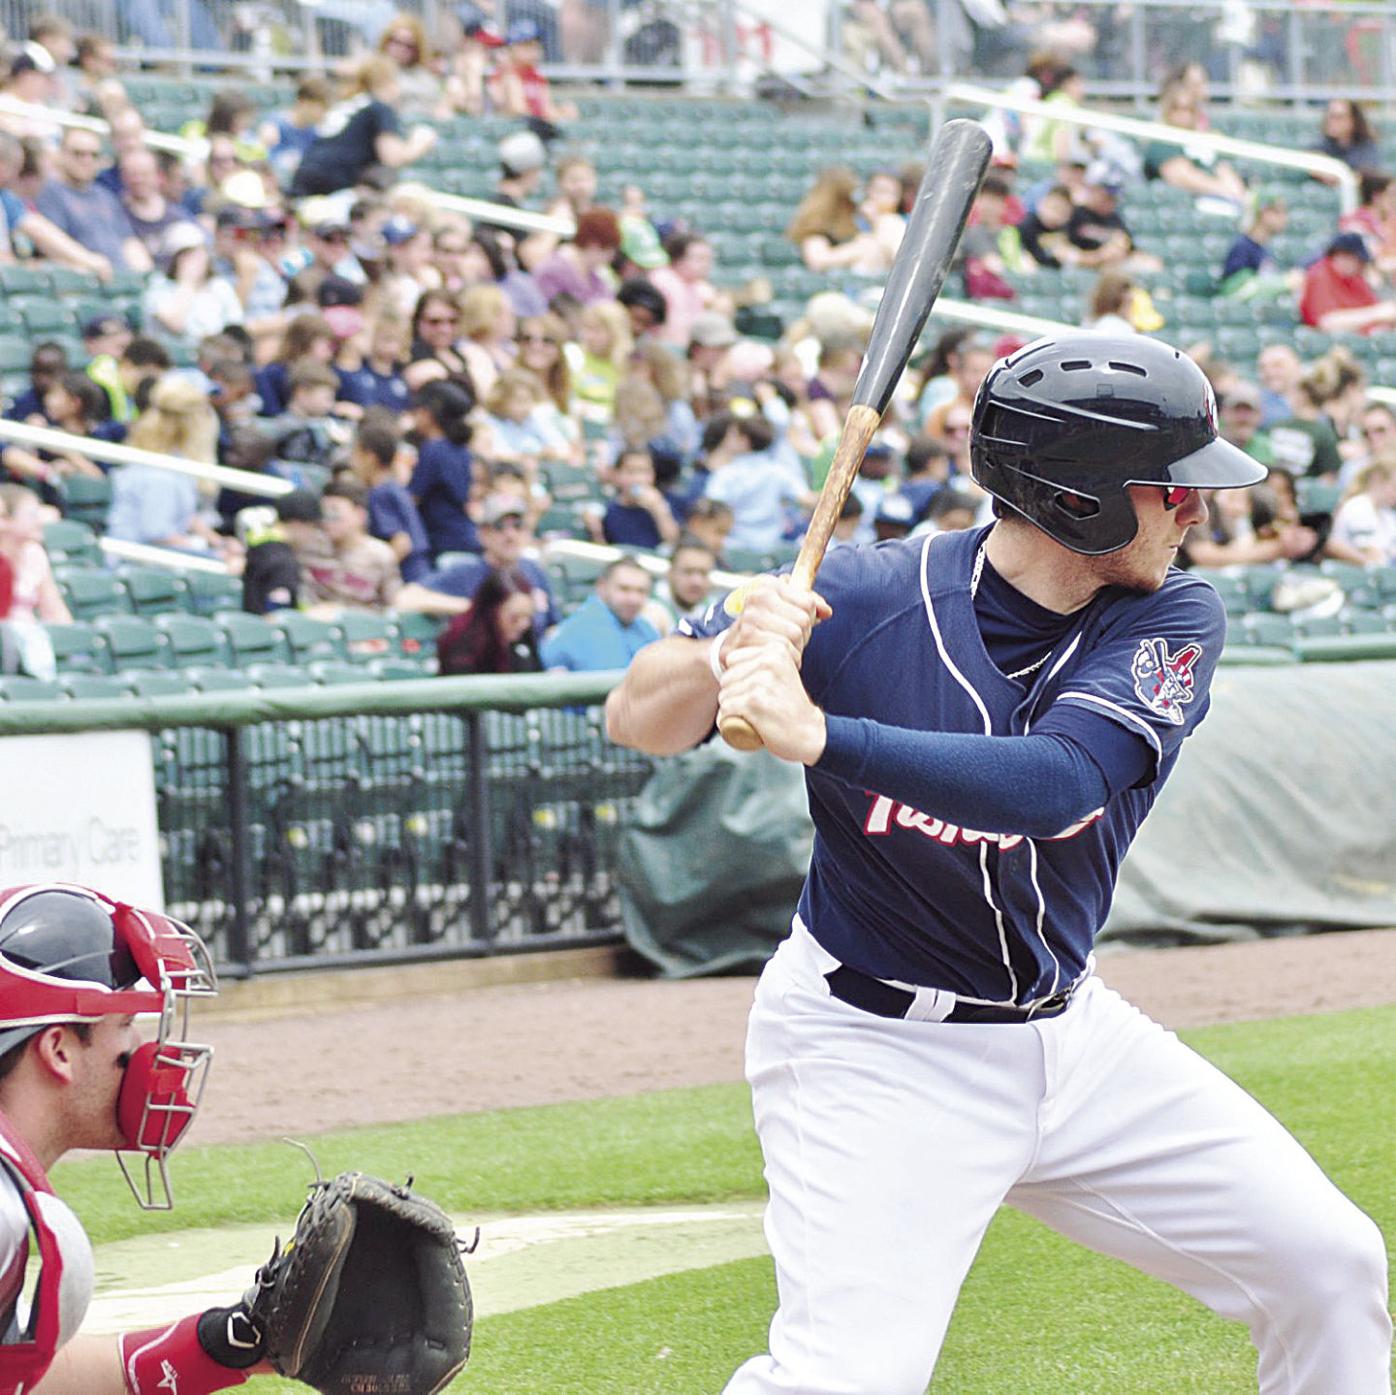 Jansen's really seeing the ball, Fisher Cats